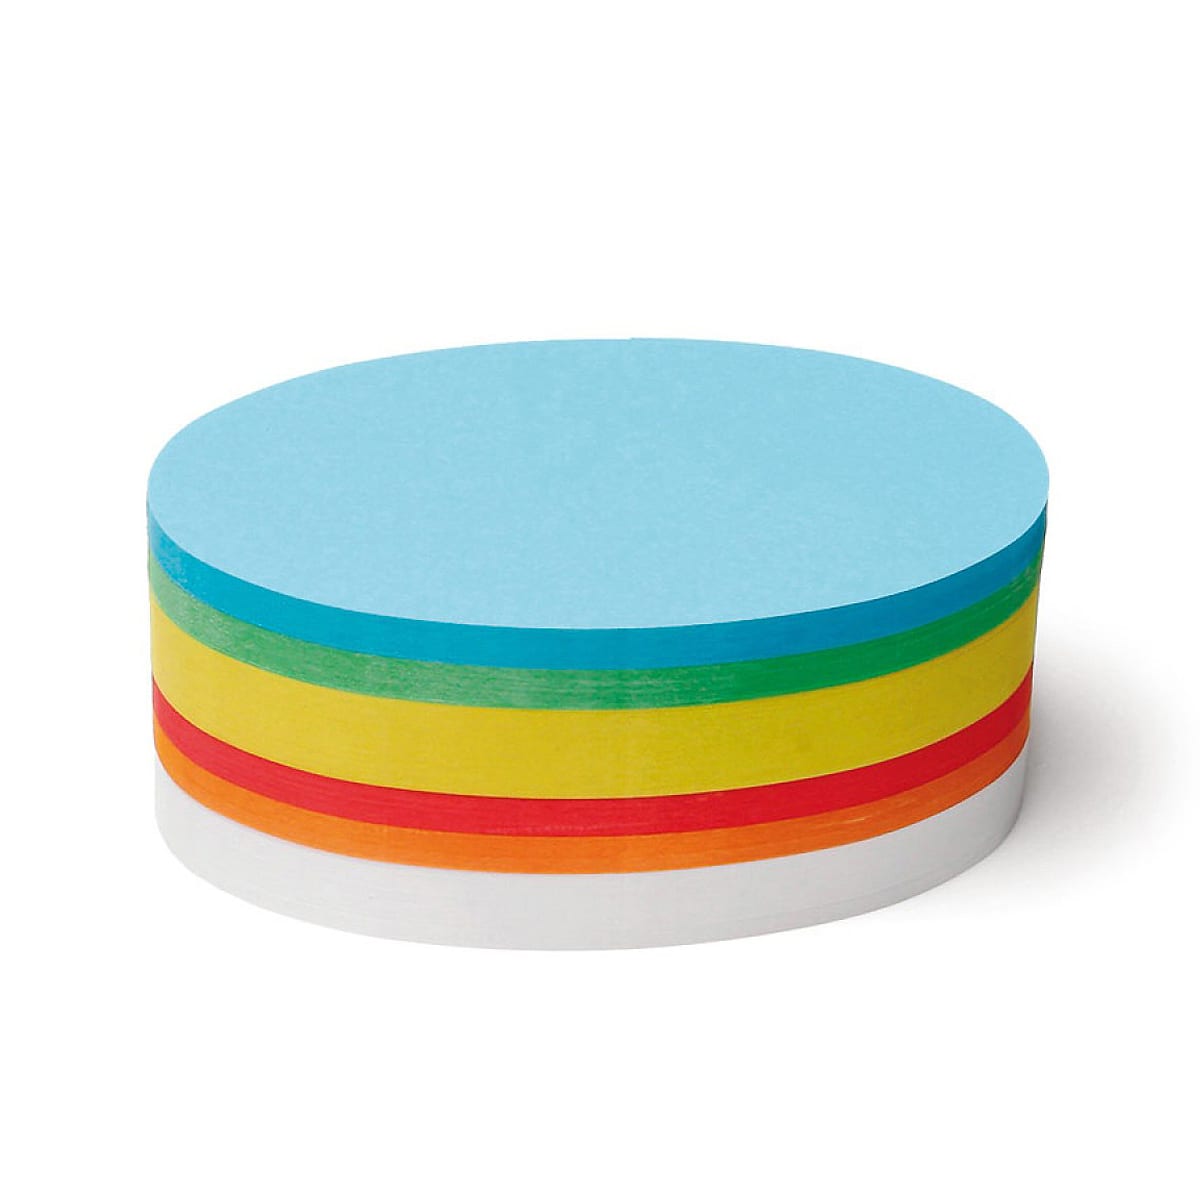 Pin-It Cards, oval, 500 sheets, assorted